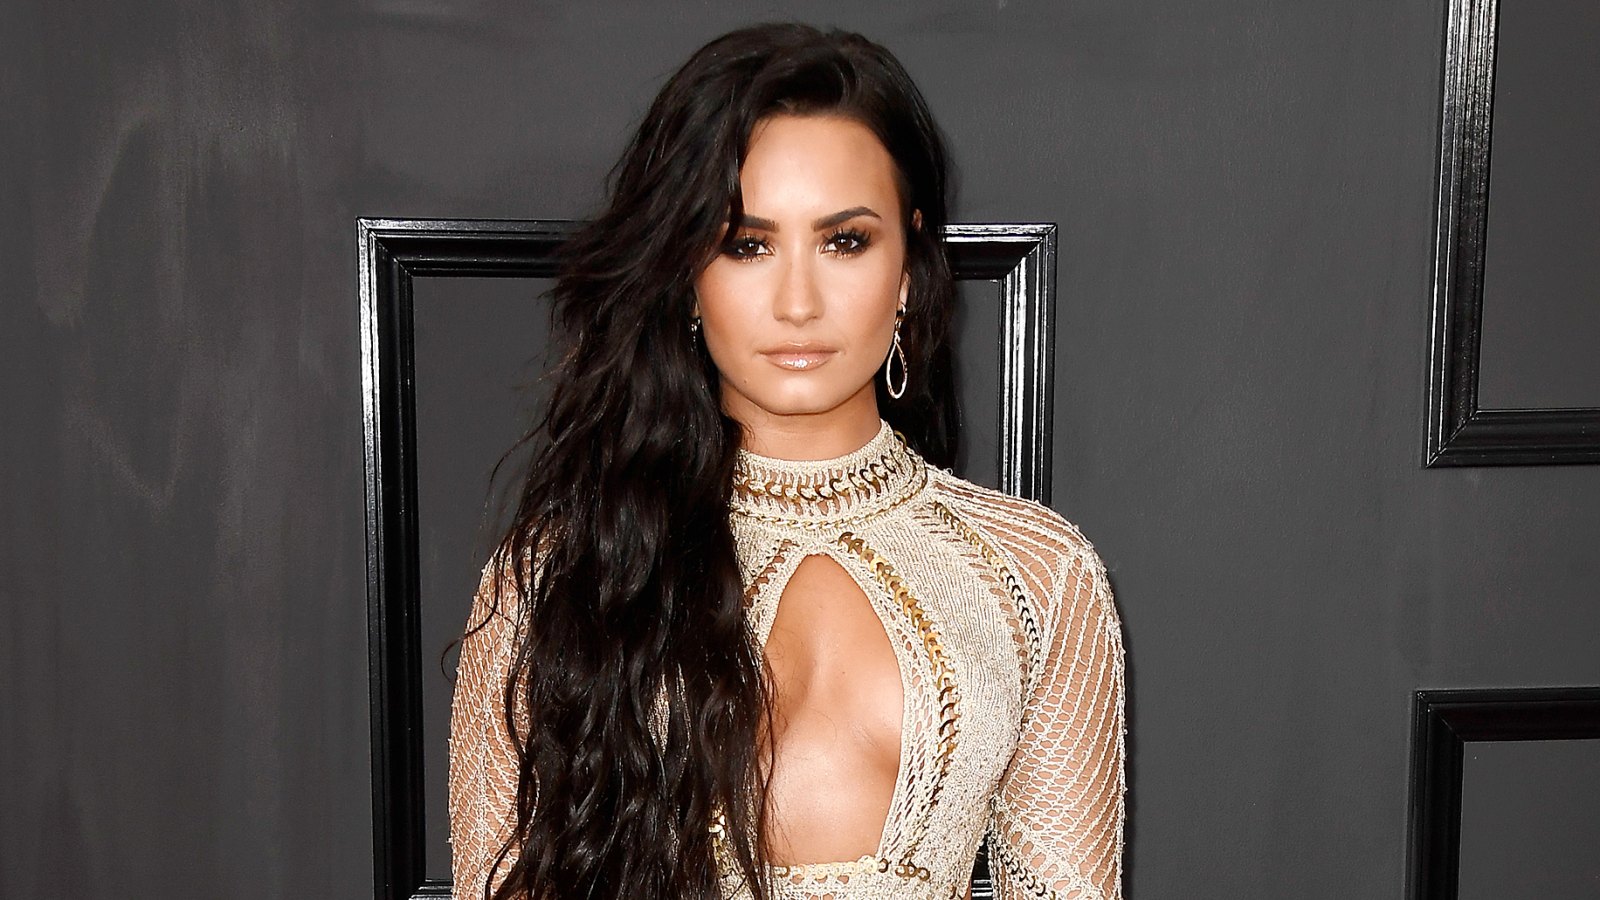 Demi Lovato Cancels Mexican South American Tour Dates After Overdose